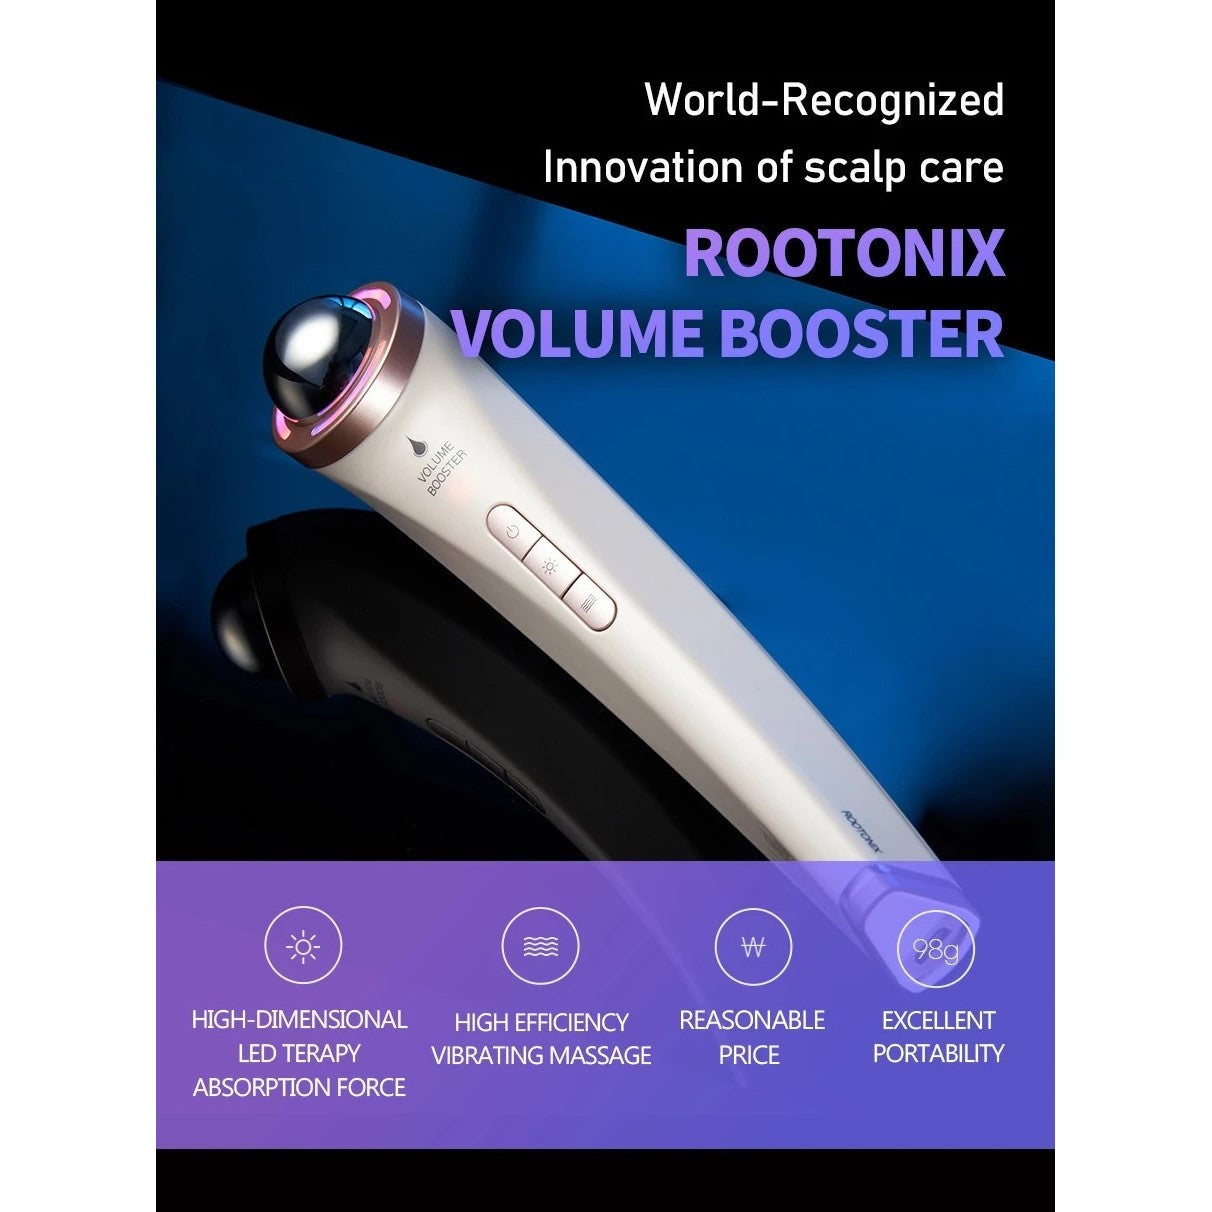 Rootonix Volume Booster Scalp Care Device RT-01 (Made in Korea)